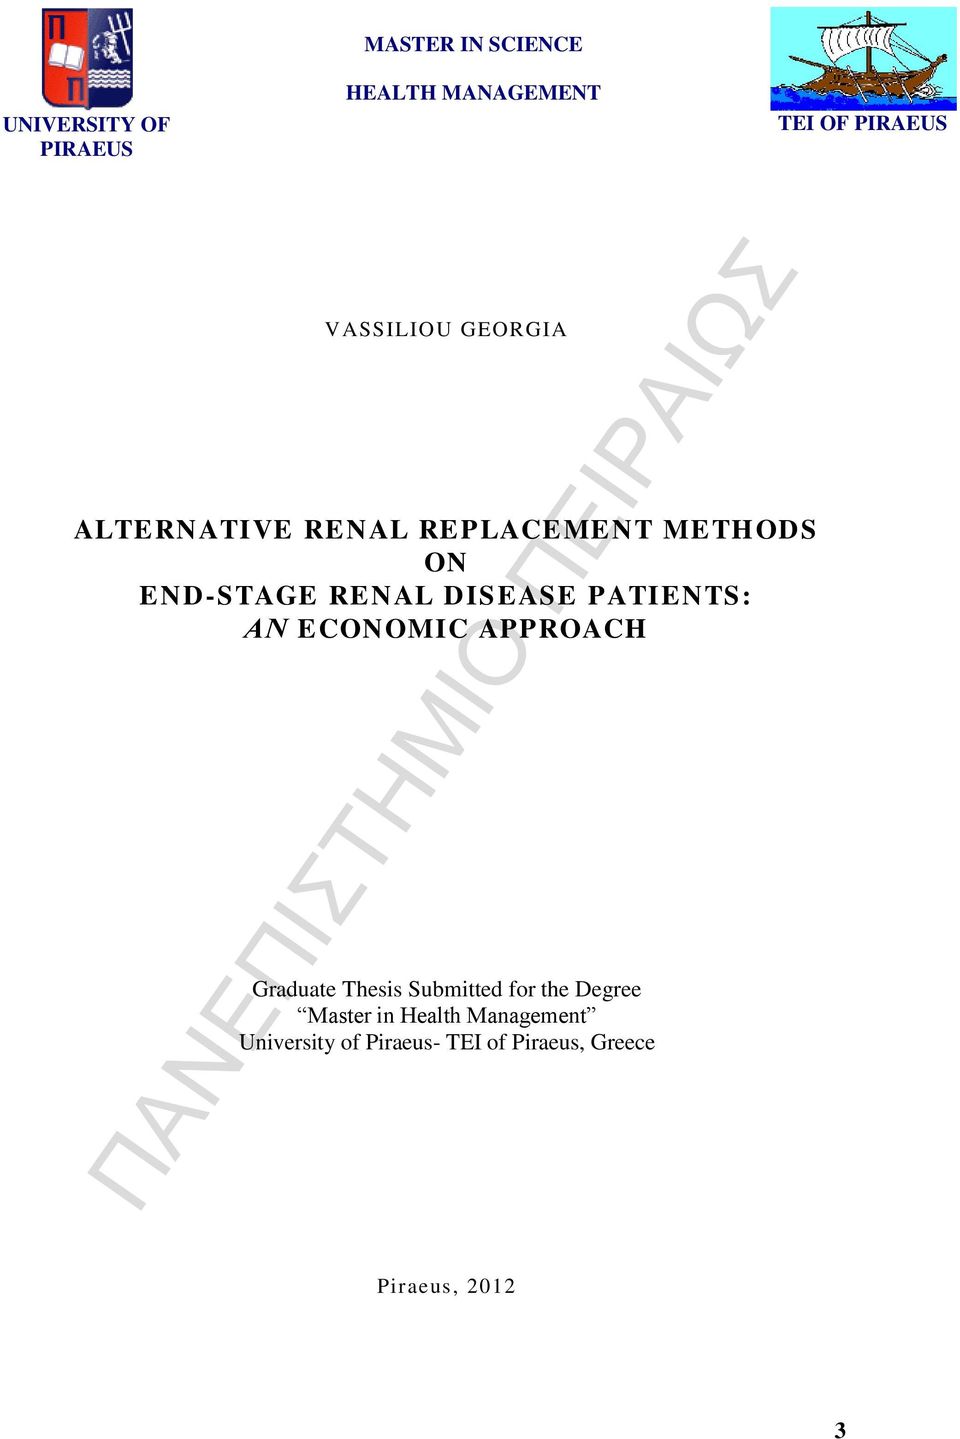 DISEASE PATIENTS: ΑΝ ECONOMIC APPROACH Graduate Thesis Submitted for the Degree